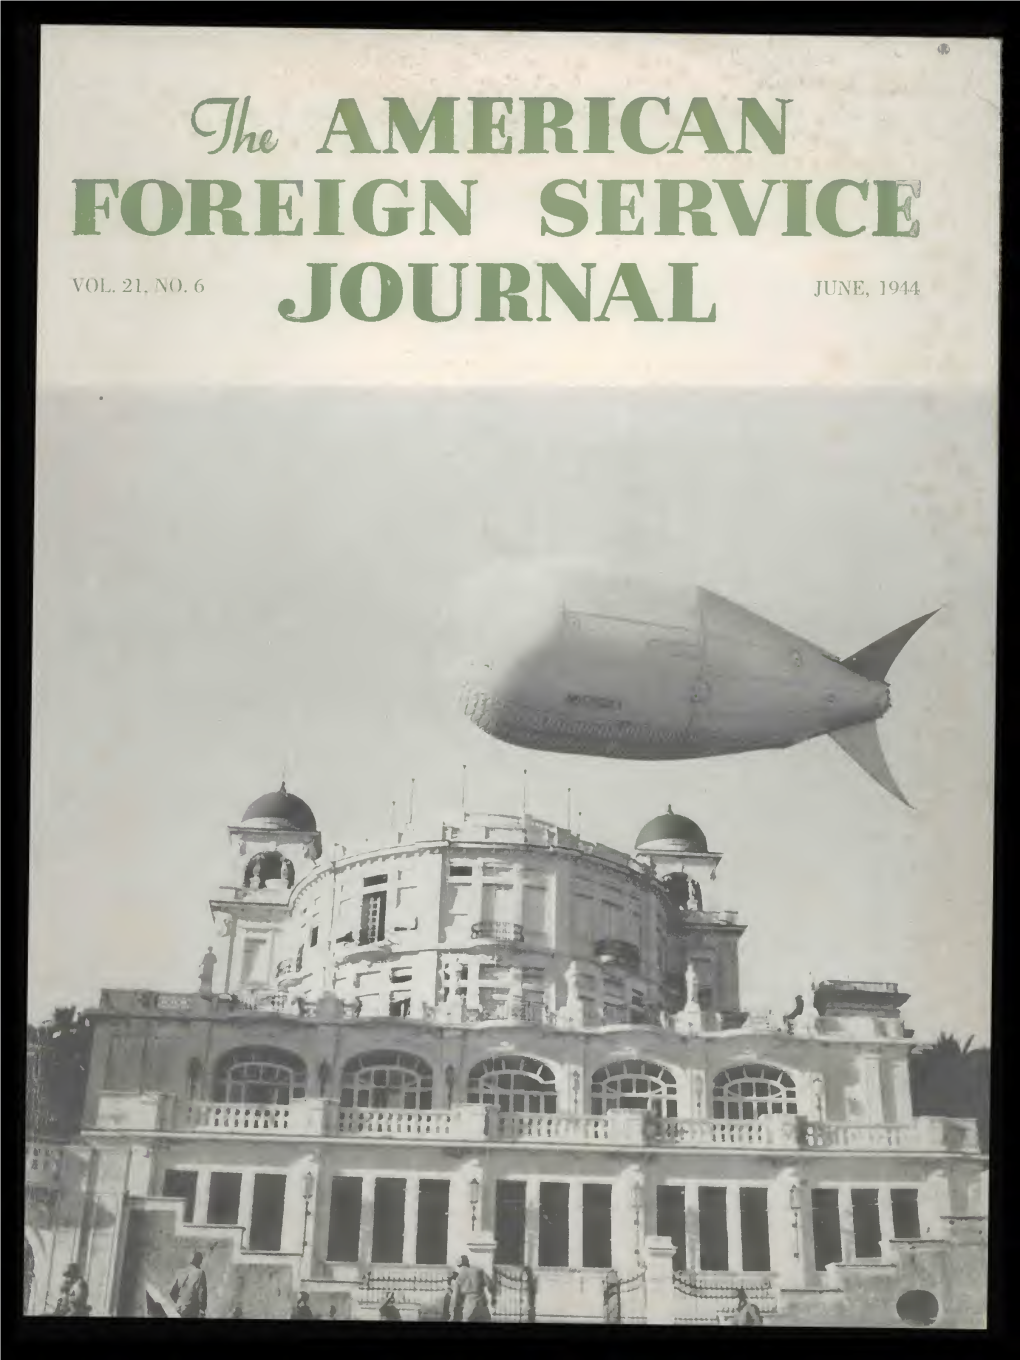 The Foreign Service Journal, June 1944